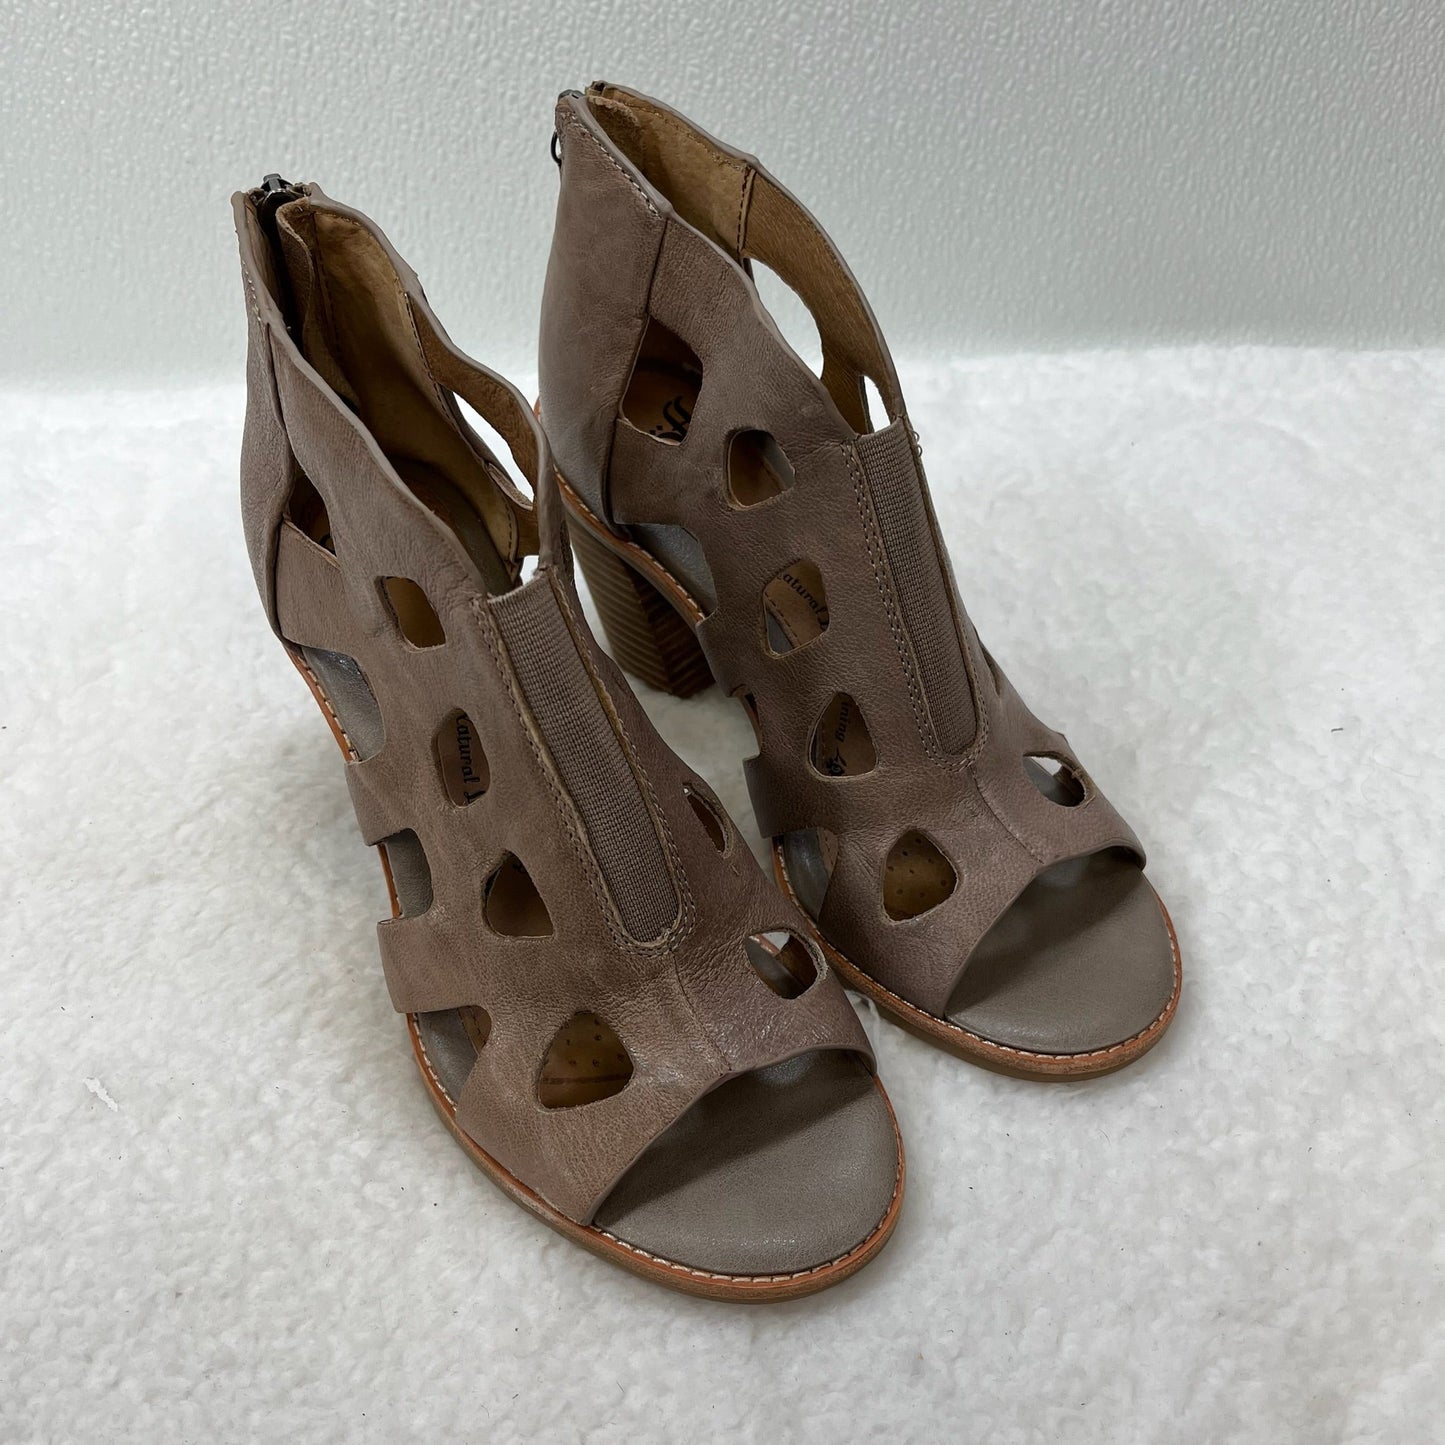 Taupe Shoes Heels Block Sofft, Size 6.5